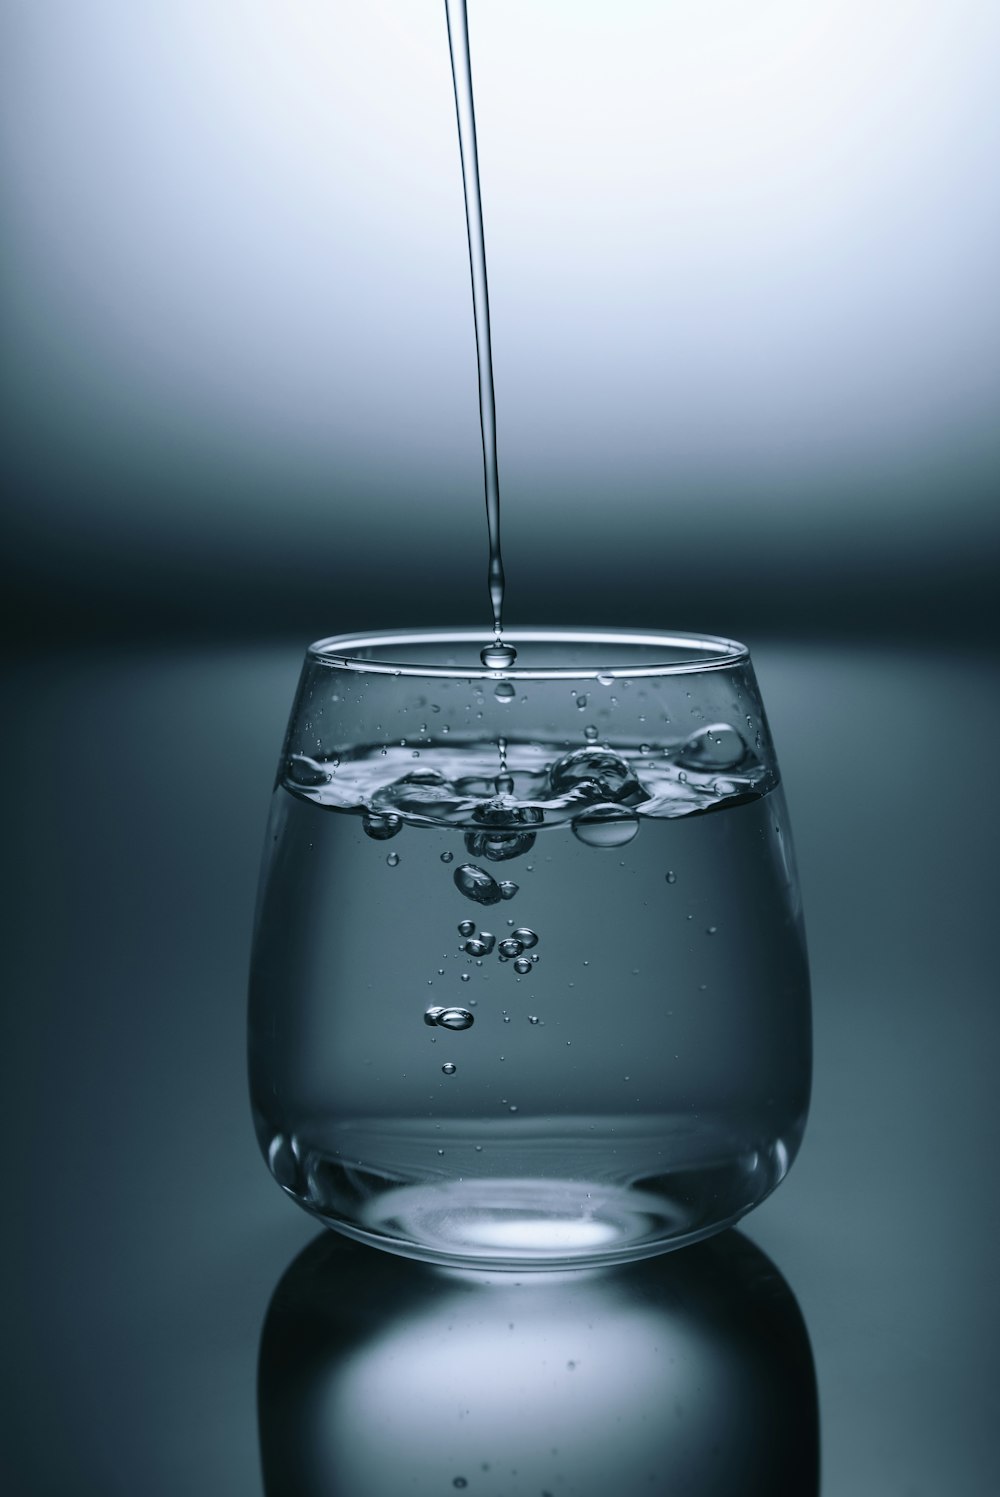 500+ Drinking Water Pictures | Download Free Images on Unsplash